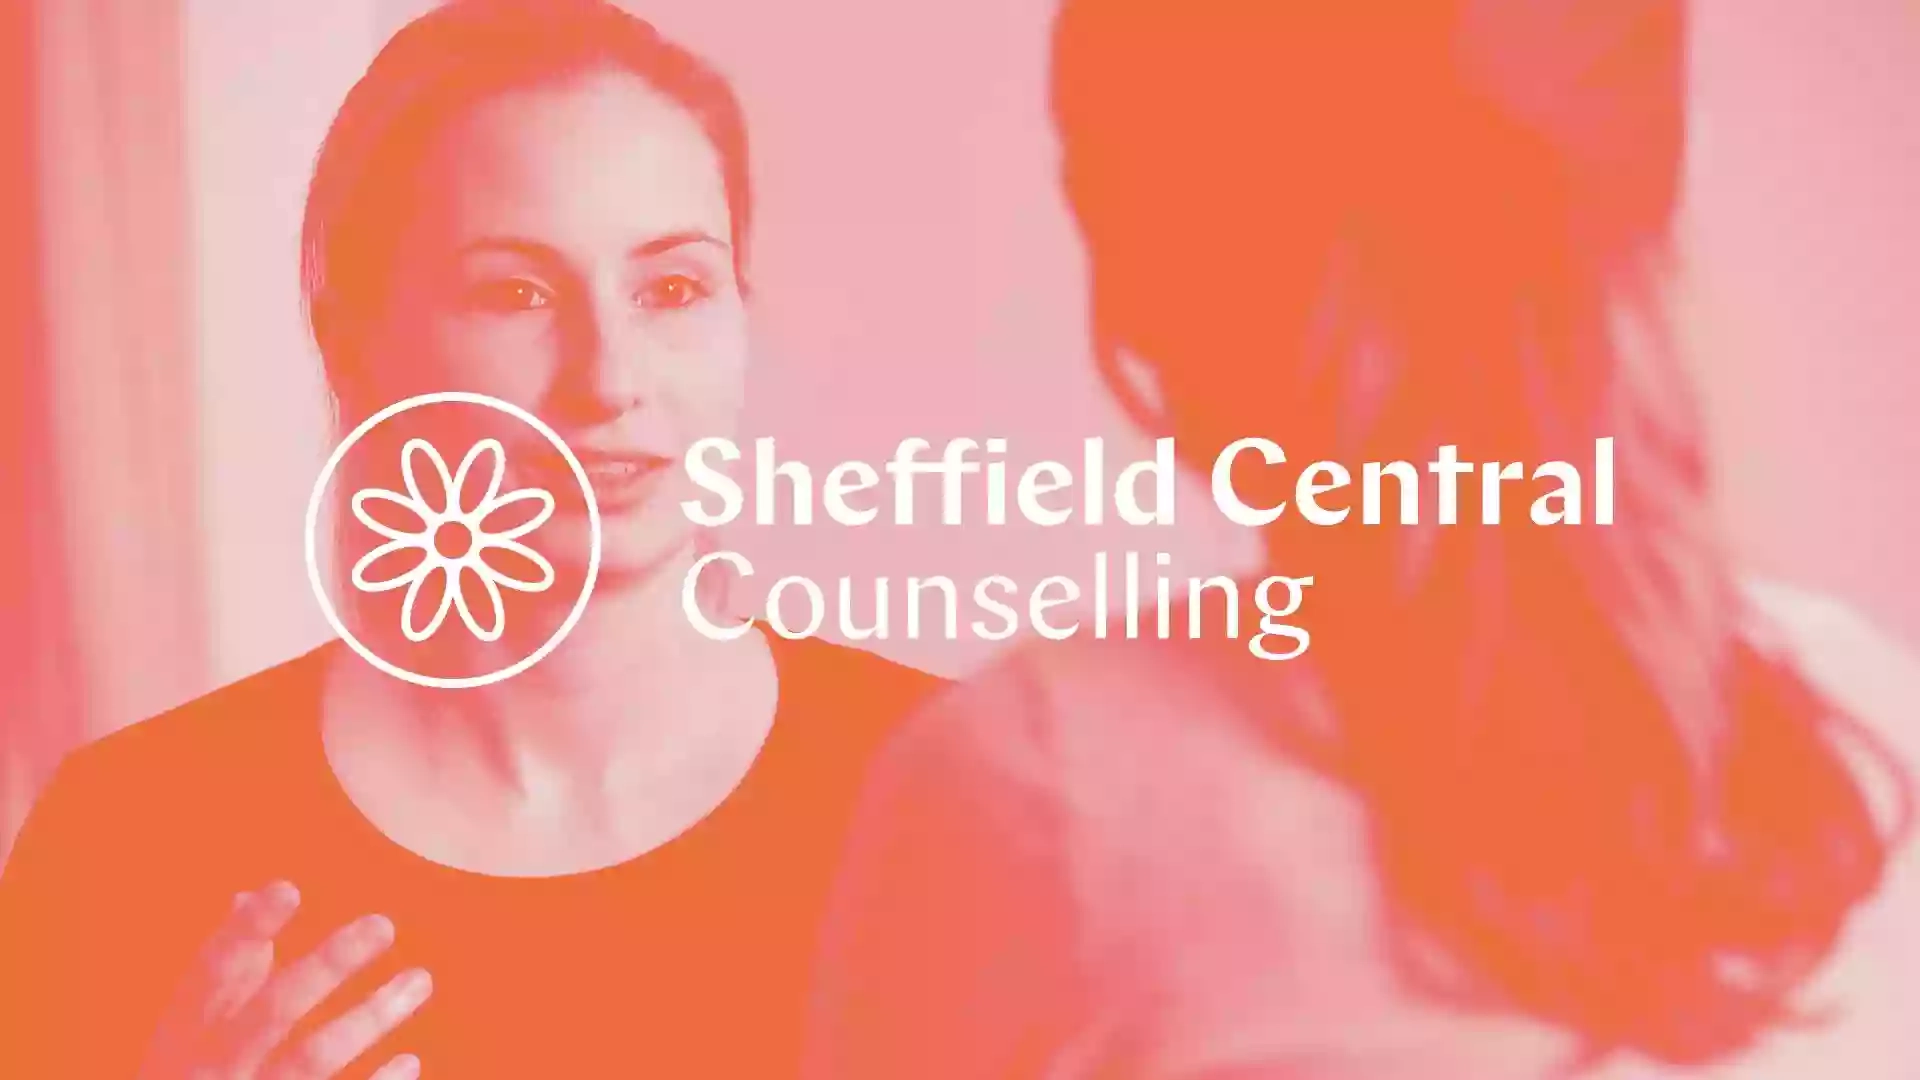 Sheffield Central Counselling Ltd